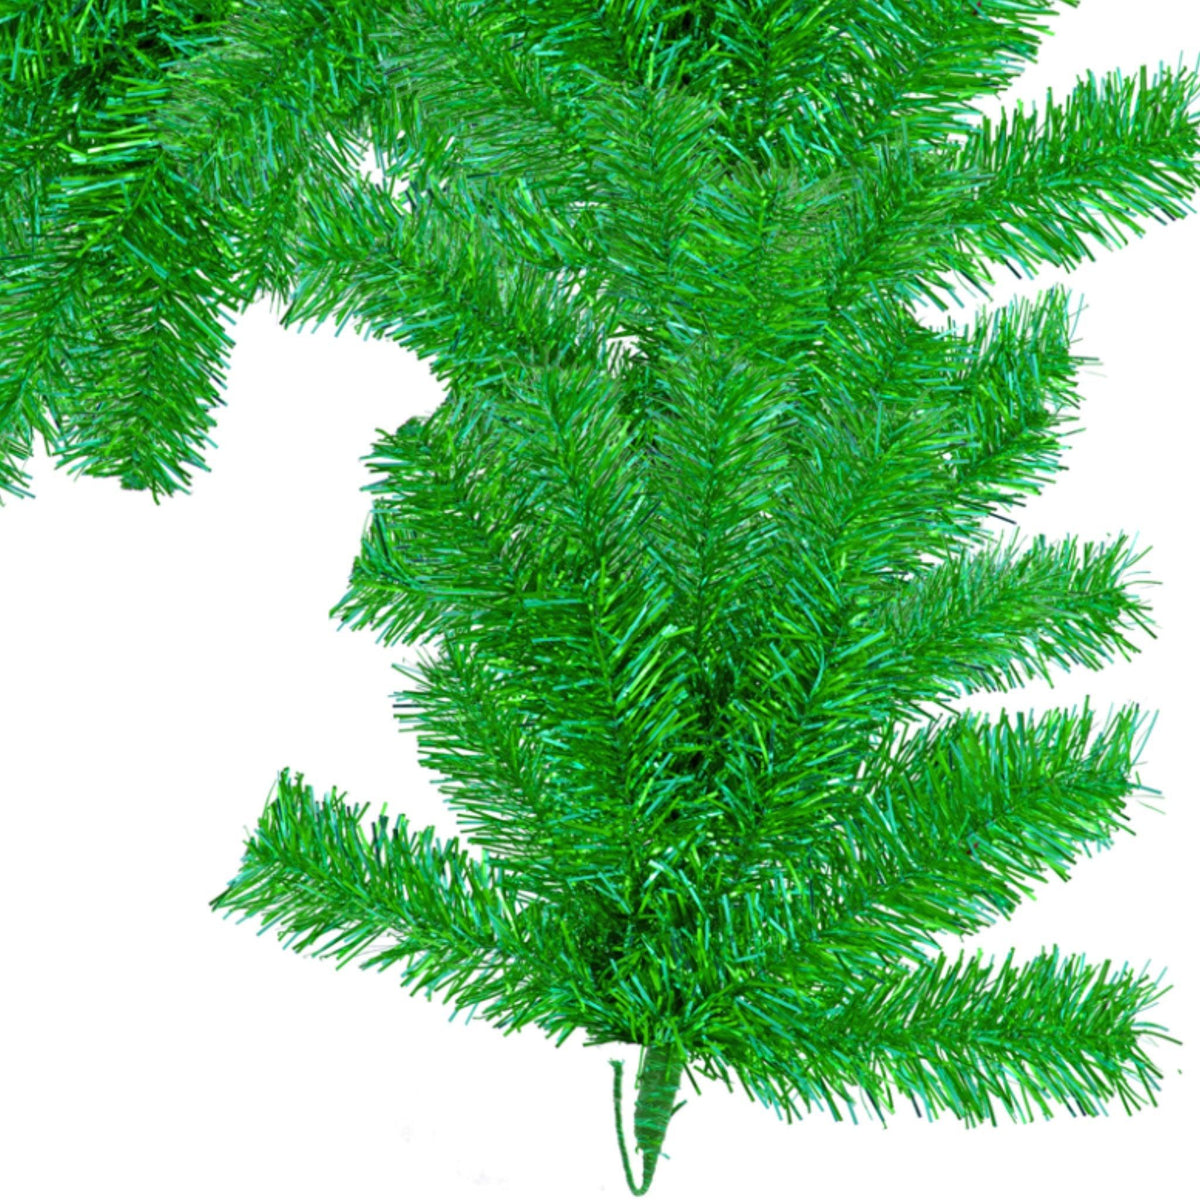 Shop for Lee Display's brand new 6FT Metallic Green Tinsel Brush Garlands on sale now at leedisplay.com.  Buy 1 now.